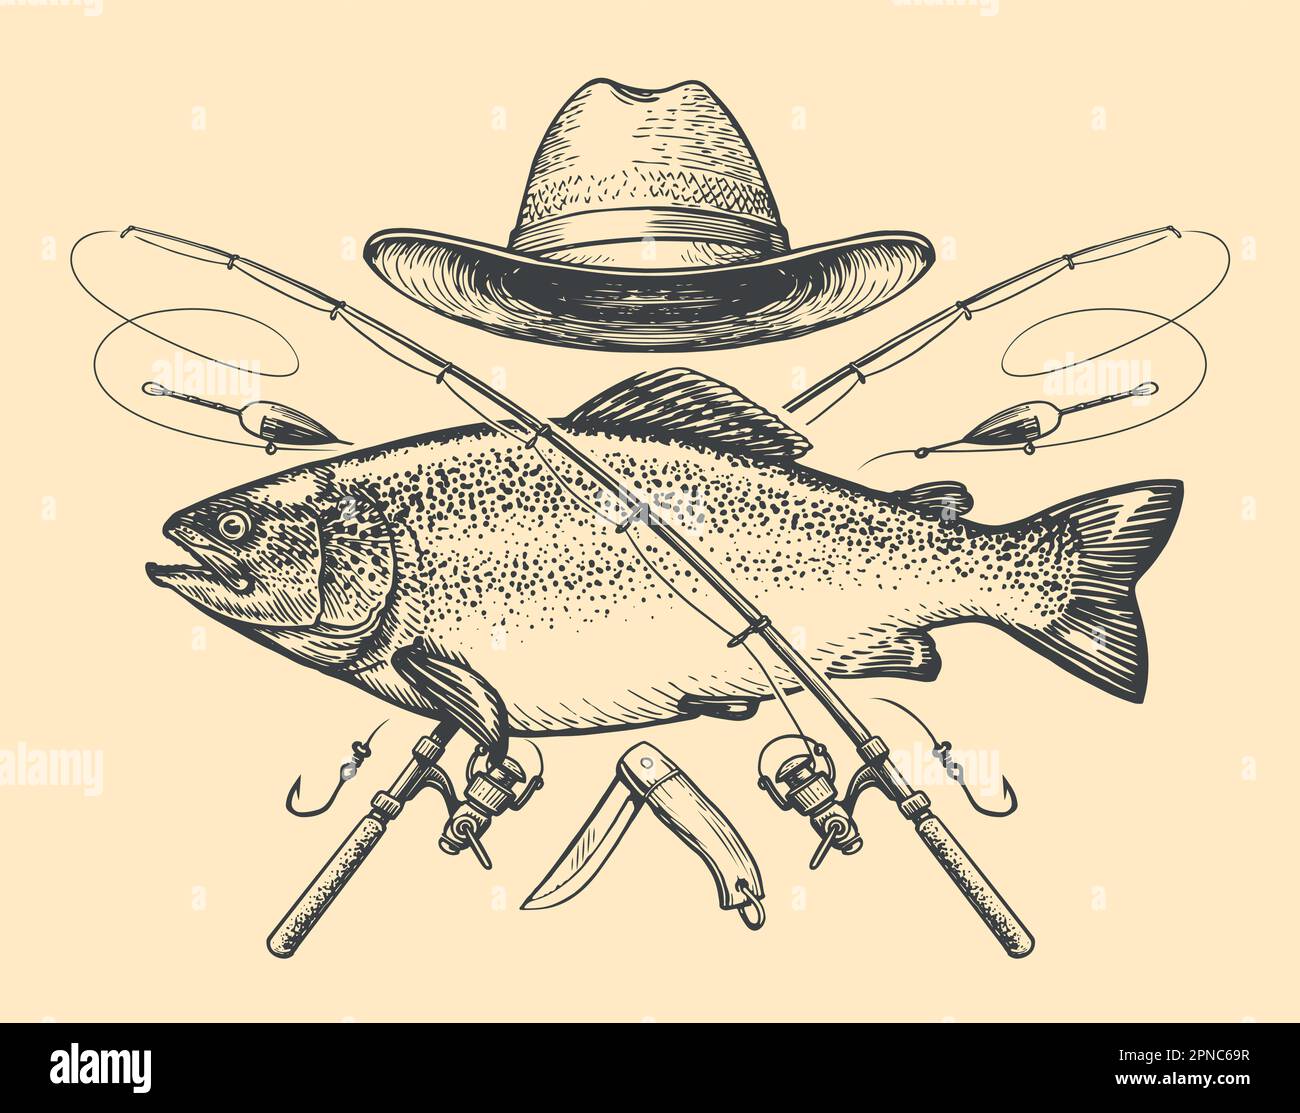 Fishing emblem in vintage engraving style. Fish and rod symbol. Sports recreation, sketch vector illustration Stock Vector